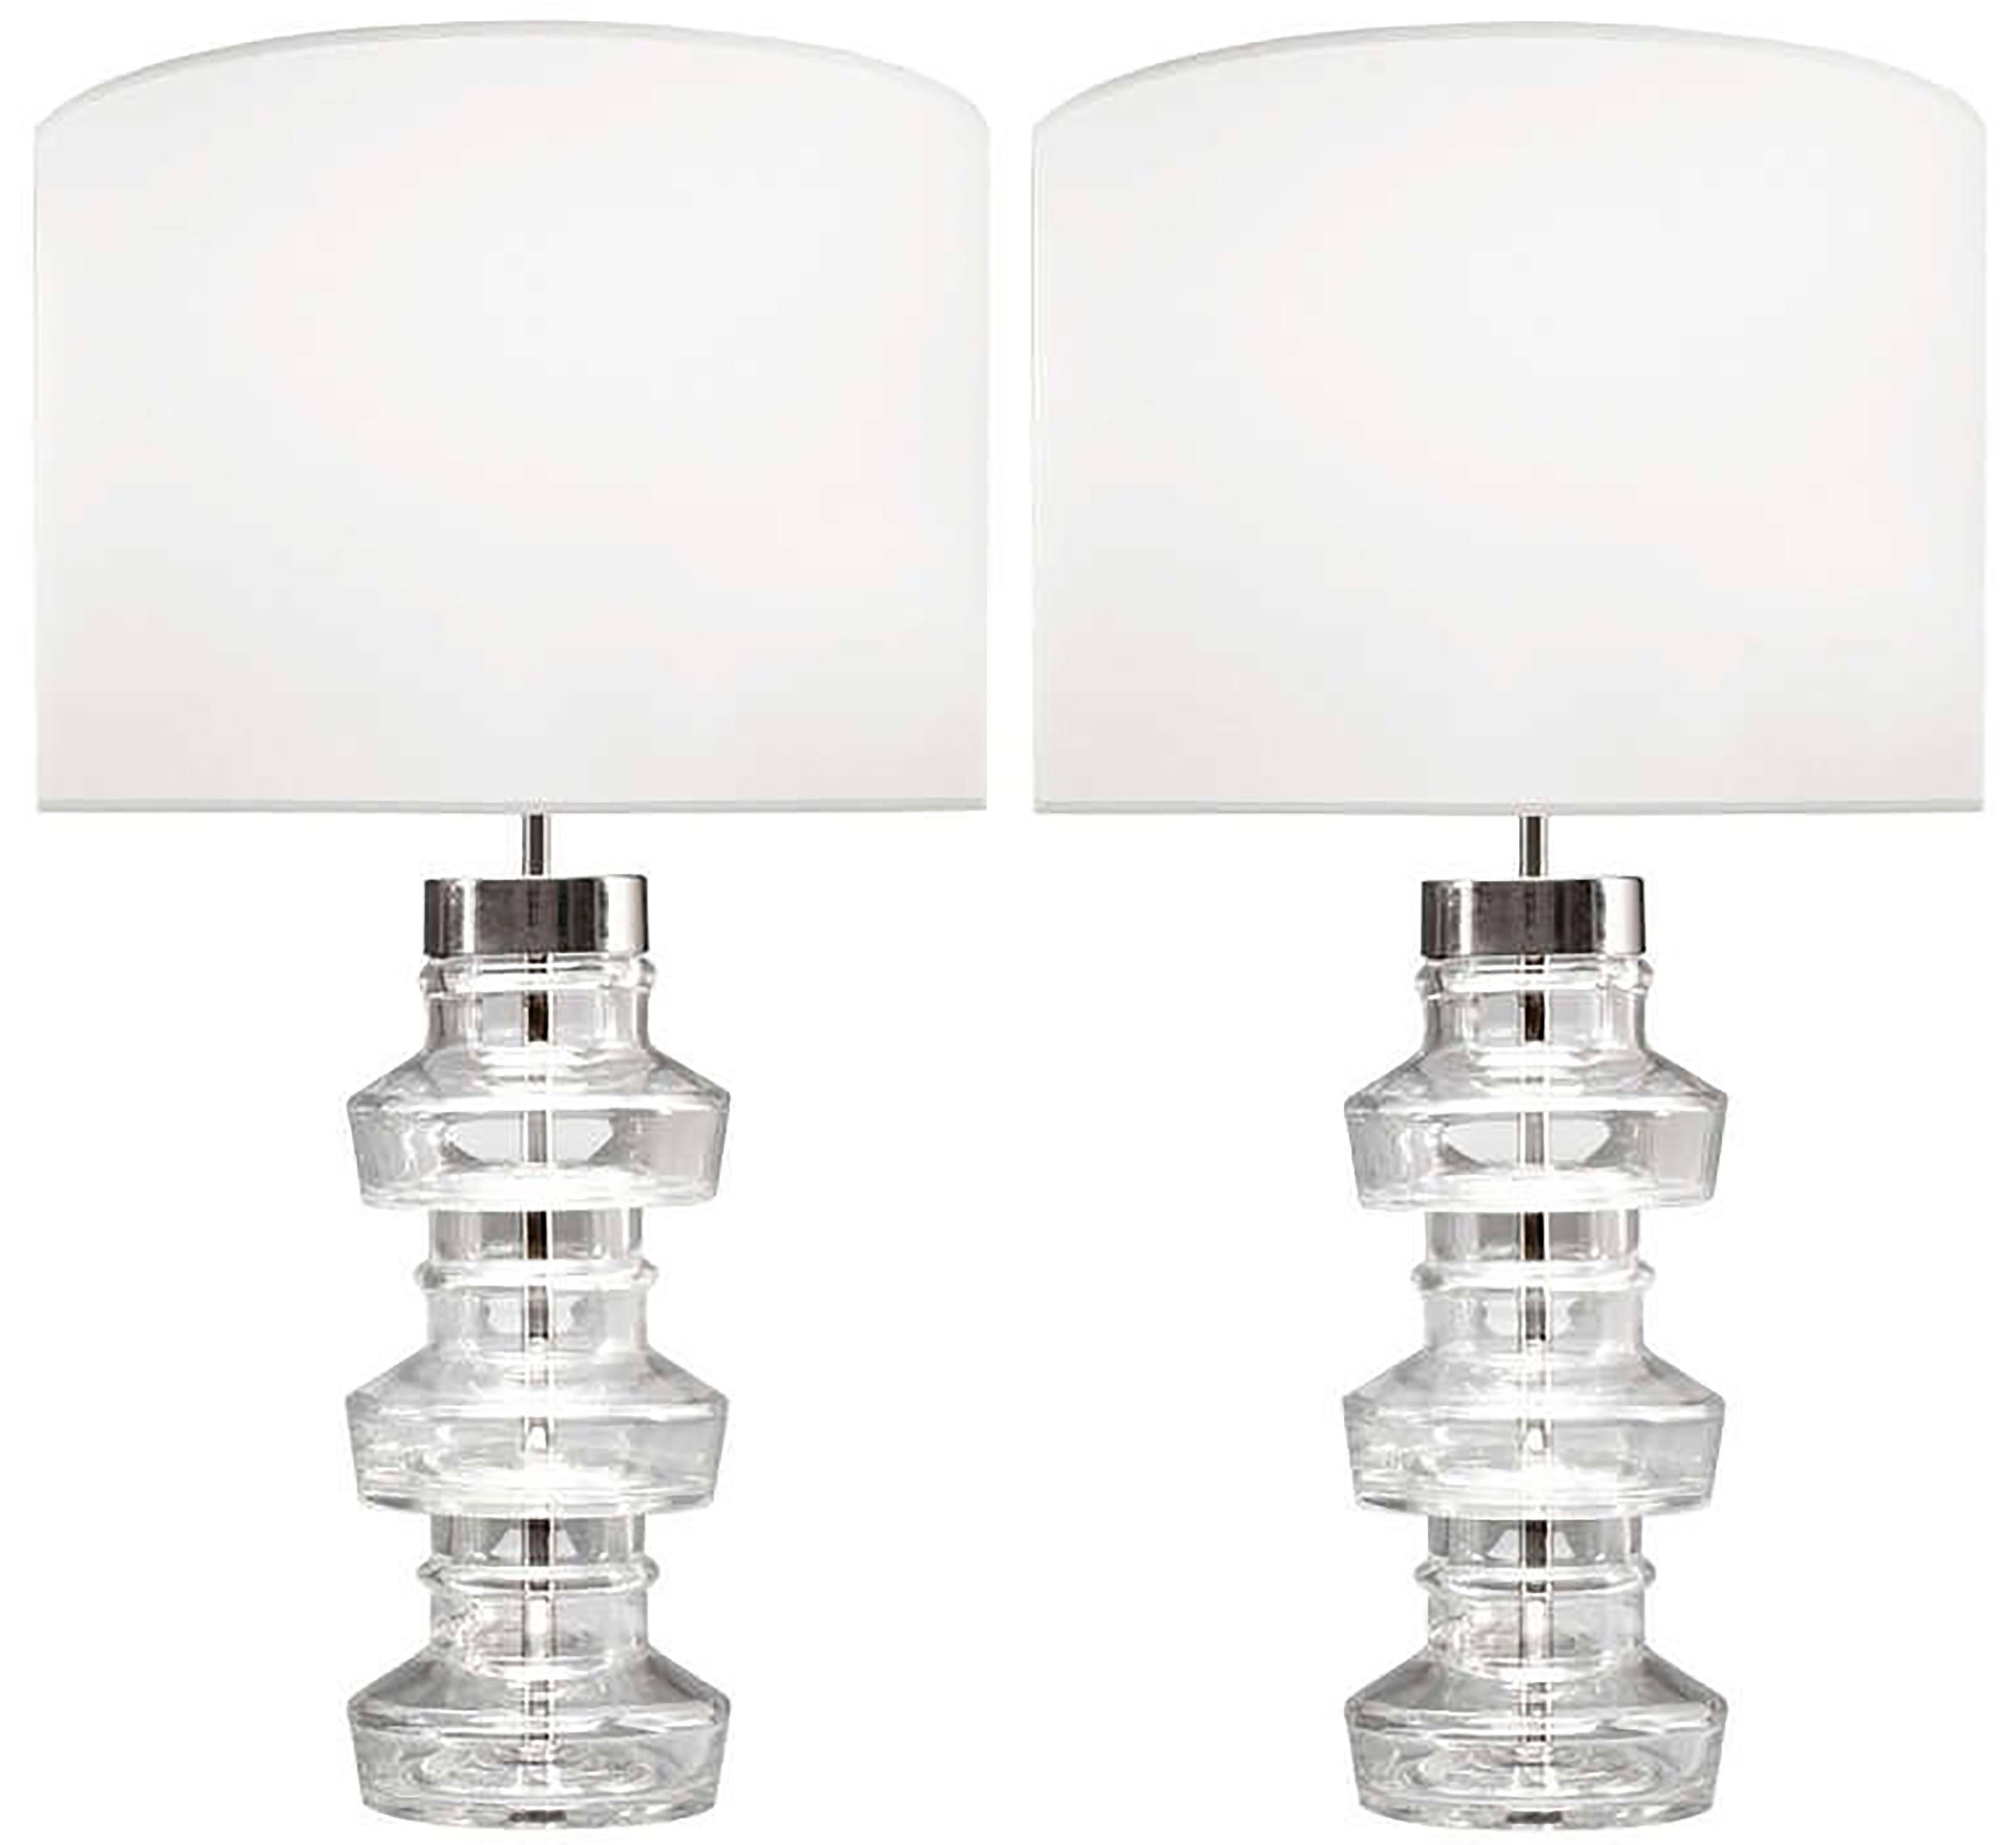 A pair of  clear glass lamps with polished nickel hardware by Carl Fagerlund for Orrefors. 

Swedish Circa 1960's

In Stock

Lamp Shades Are Not Included.

If you are interested in Lamp Shades, please email The Craig Van Den Brulle Design Team Via